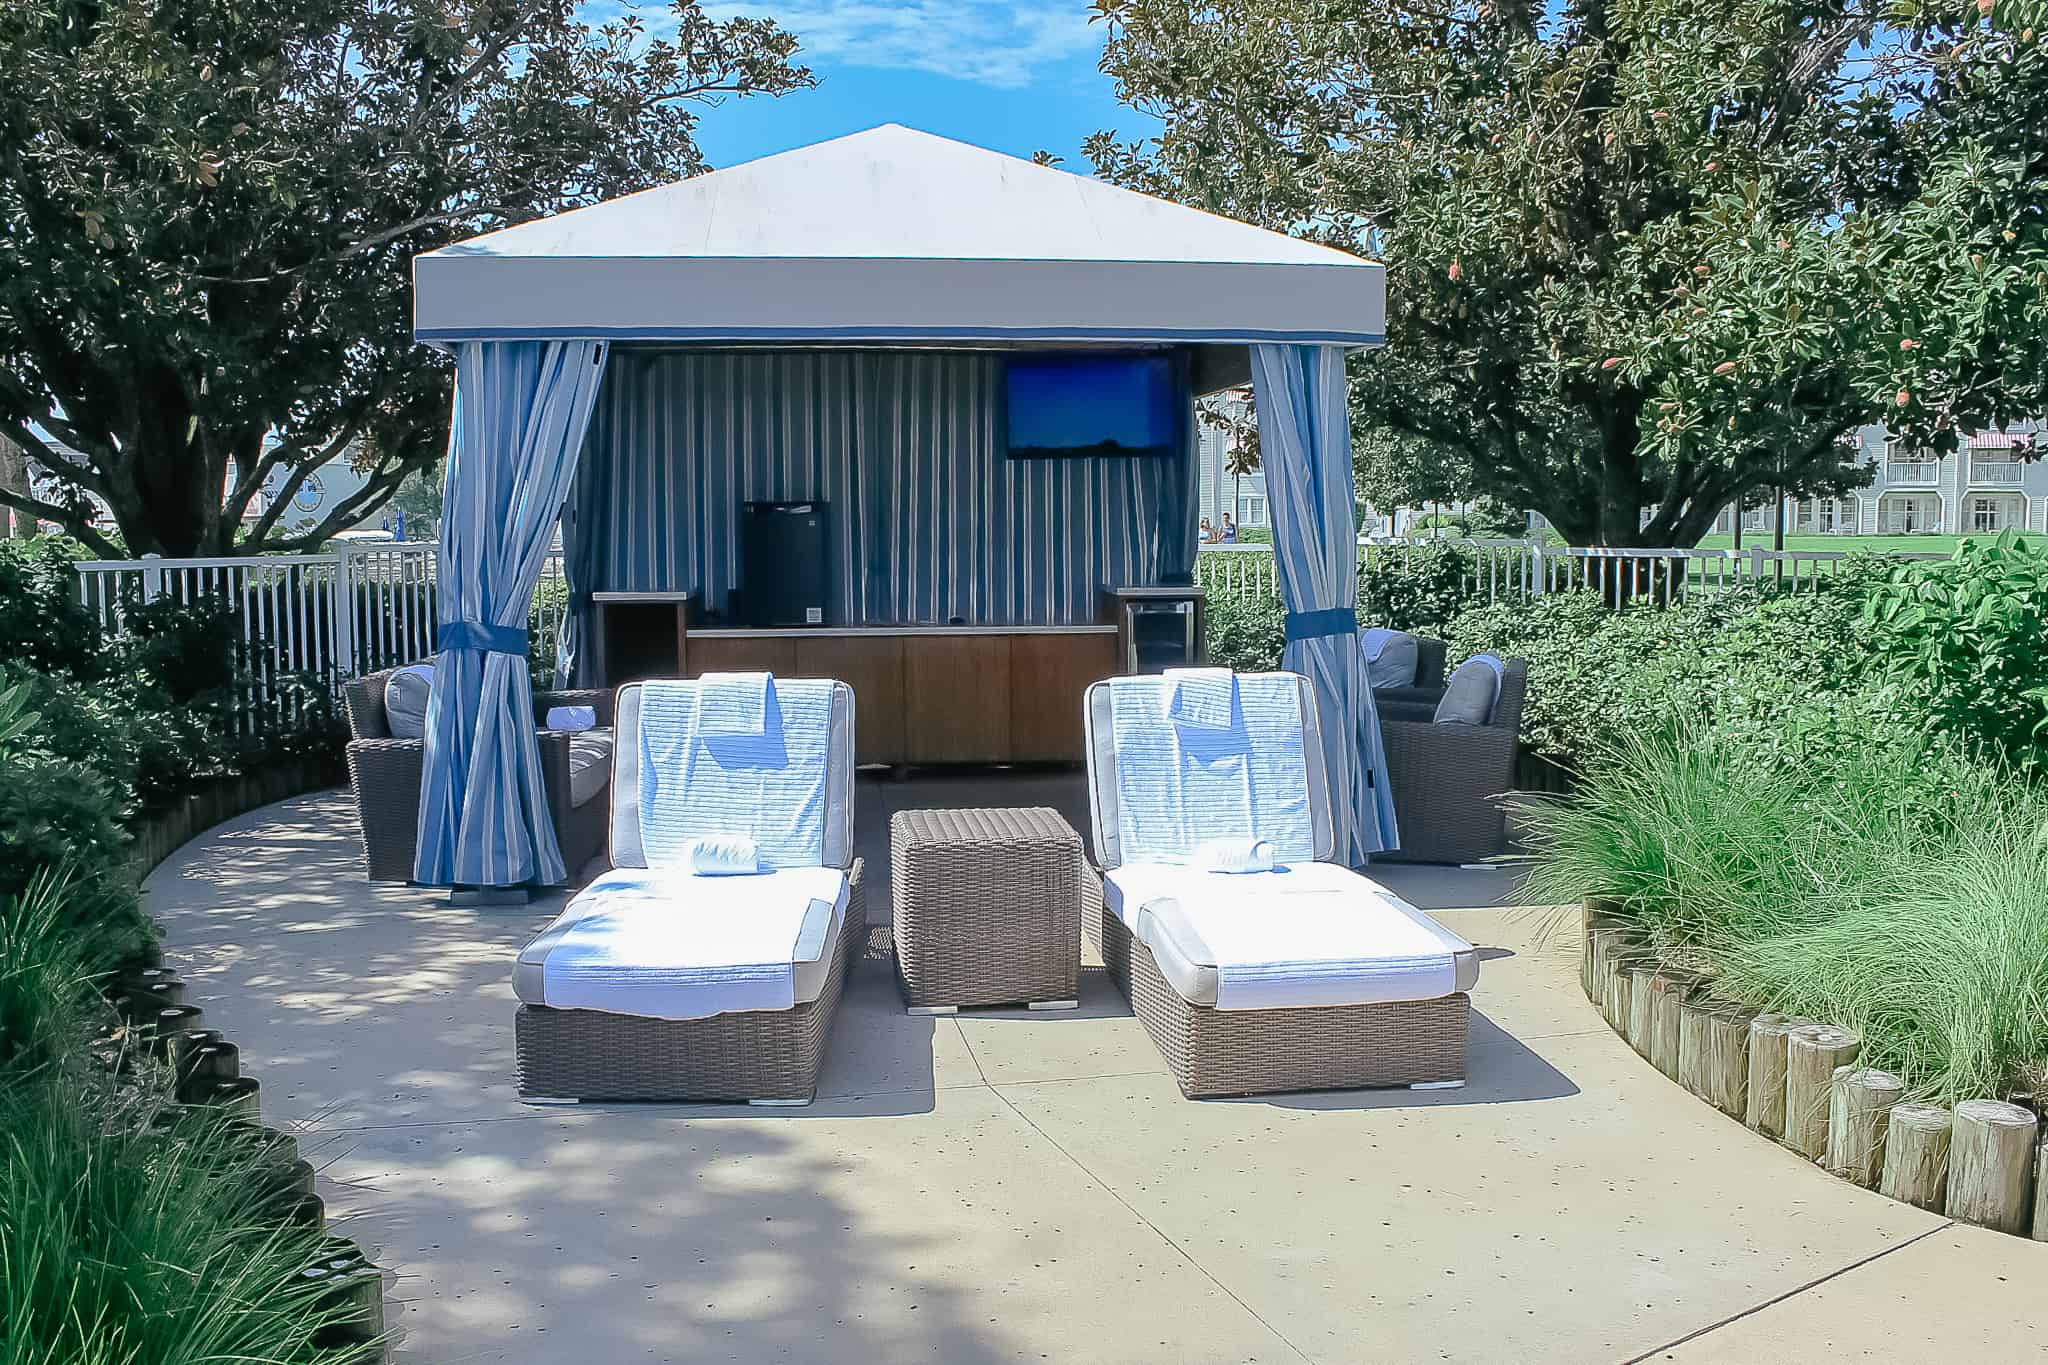 Review: Renting a Poolside Cabana at Disney World